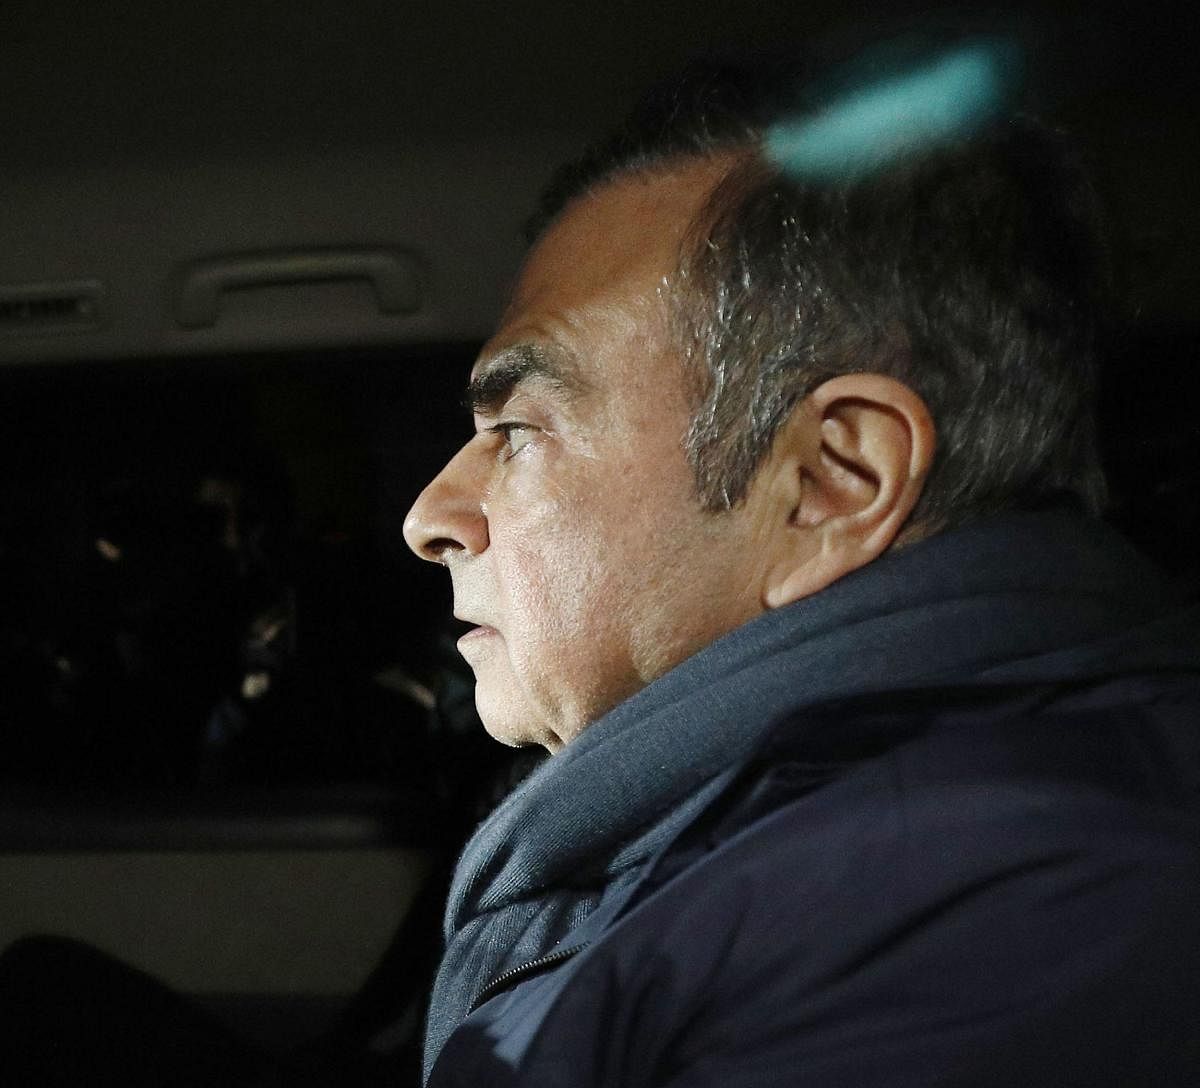 In this April 3, 2019 photo, former Nissan Chairman Carlos Ghosn in a car leaves his lawyer's office in Tokyo. Japanese prosecutors took Ghosn for questioning Thursday, April 4, 2019, barely a month after he was released on bail ahead of his trial on fina